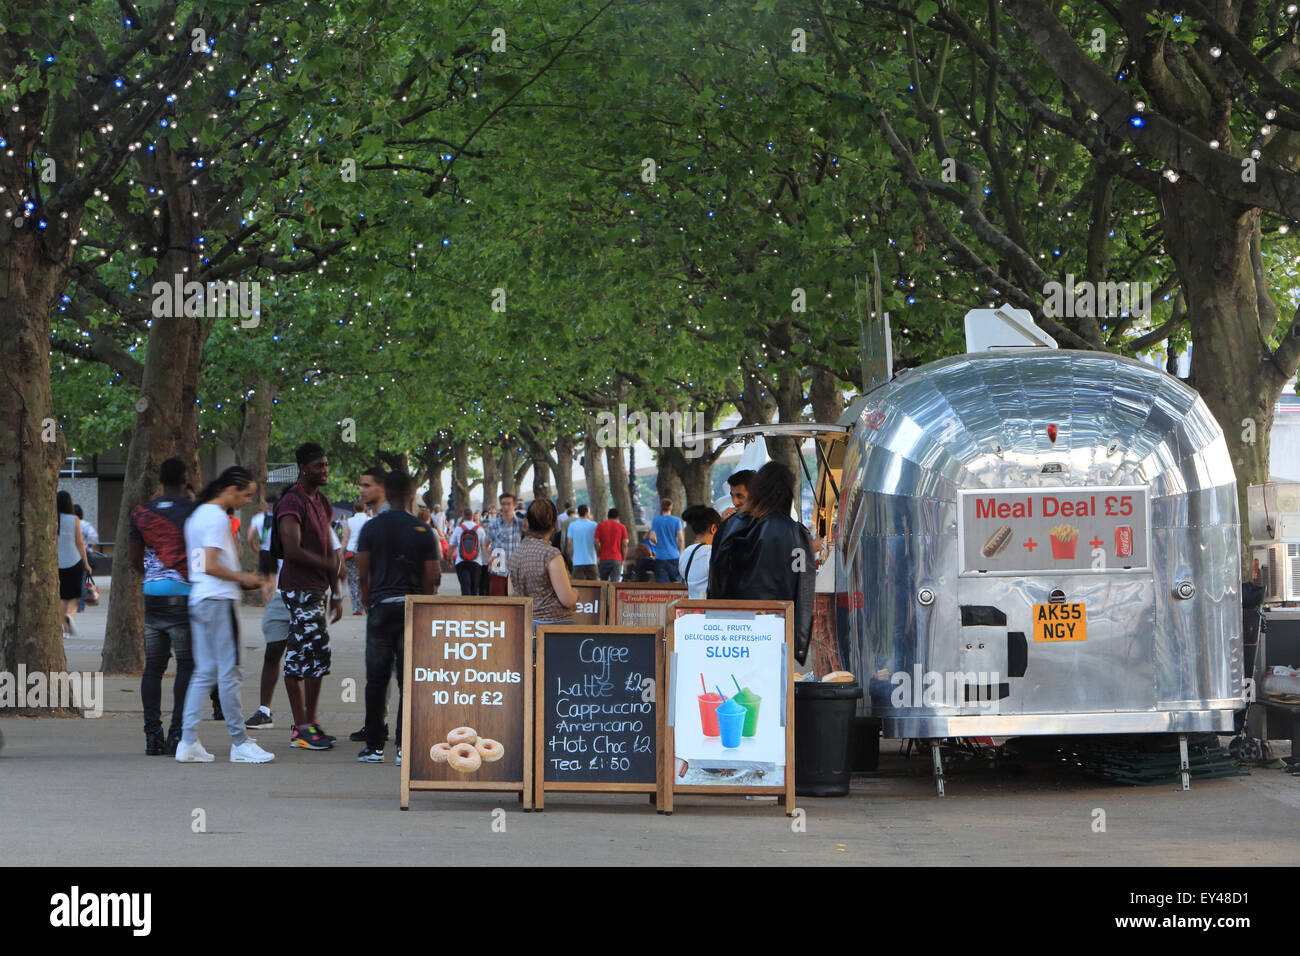 A busy, summer's evening on London's popular South Bank, with people strolling along the riverside avenue of trees, England, UK Stock Photo